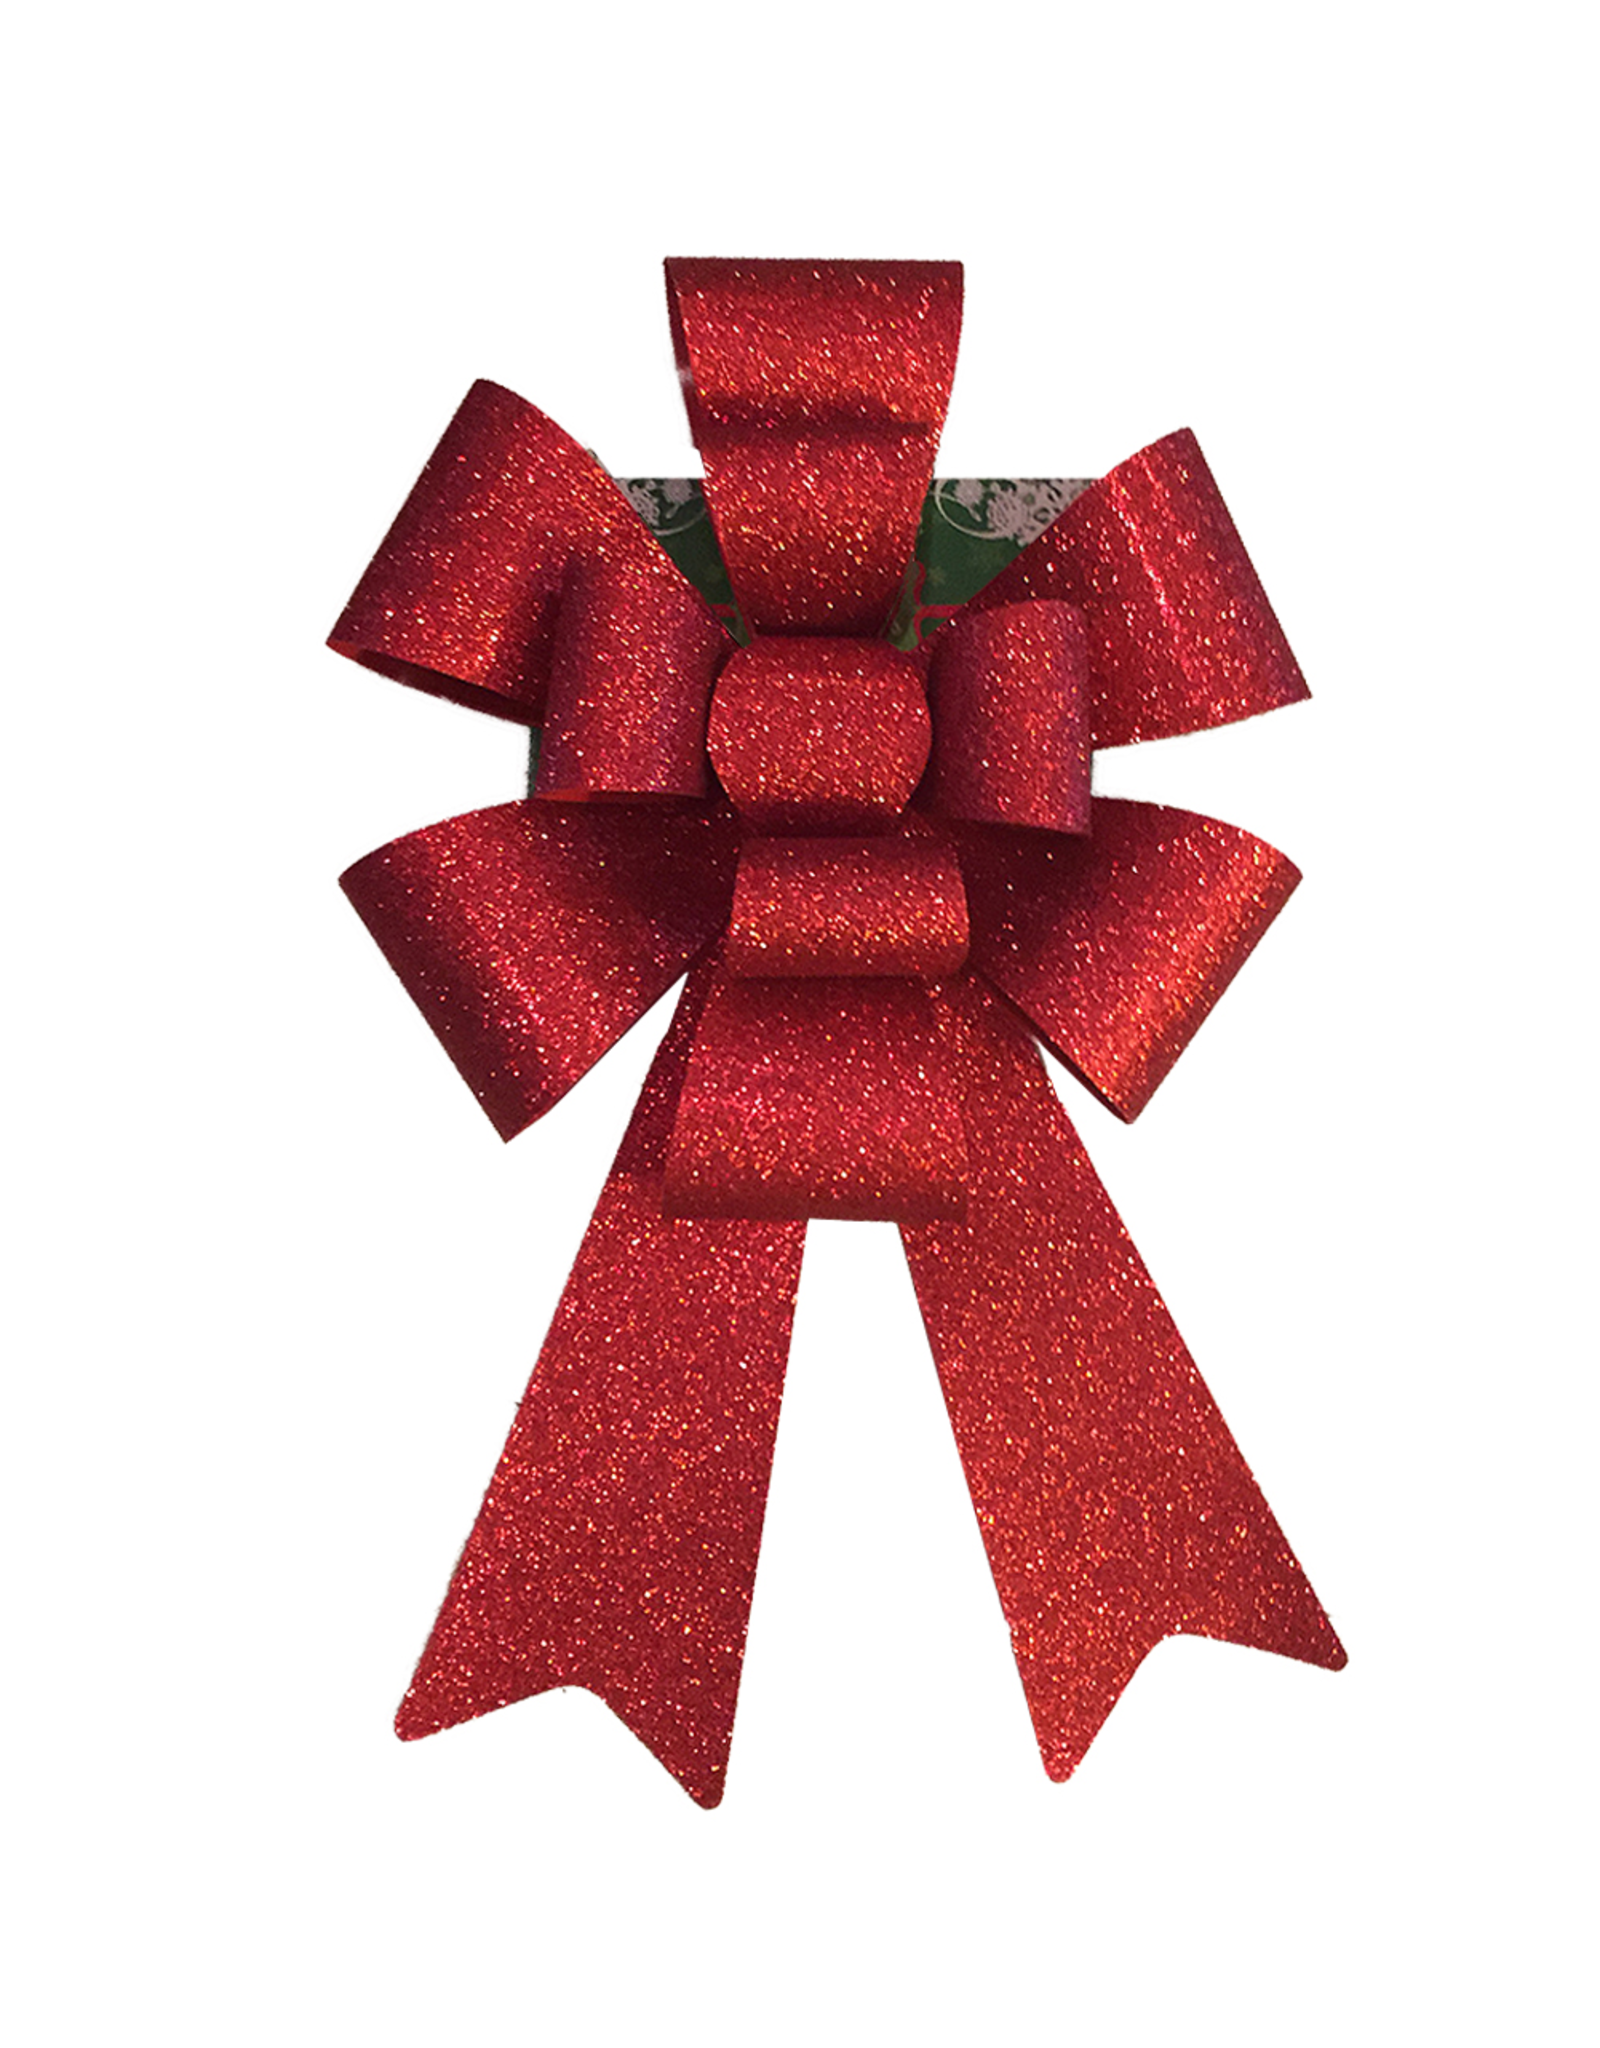 Darice Christmas Red Glitter 12 inch Bow PVC 11 Loops